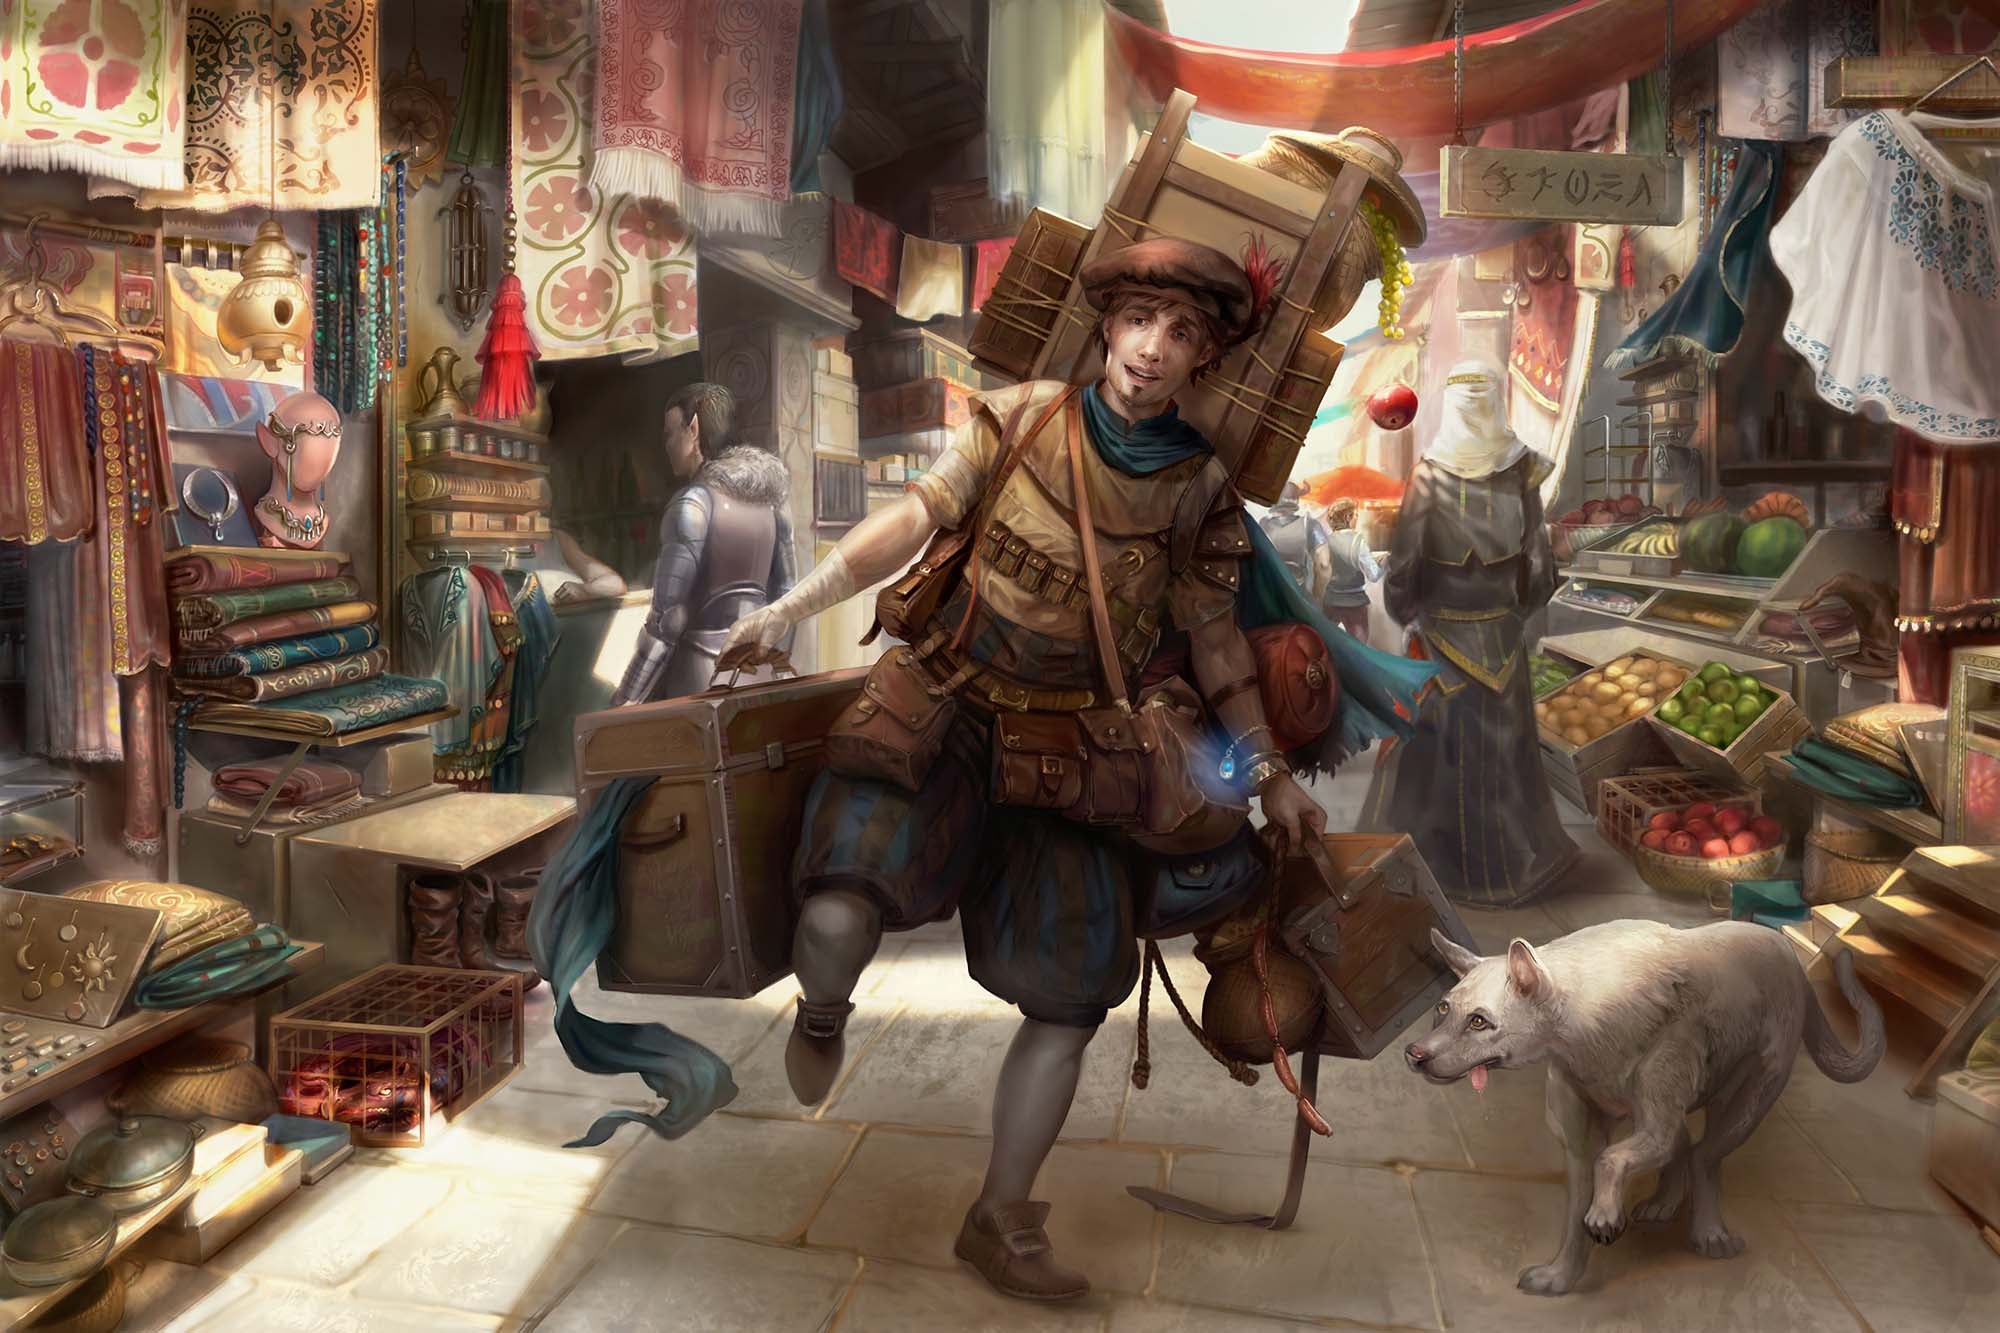 A young man carrying far too many boxes, bags, sacks, and other packages runs through a crowded bazaar while a white dog nips at his heels